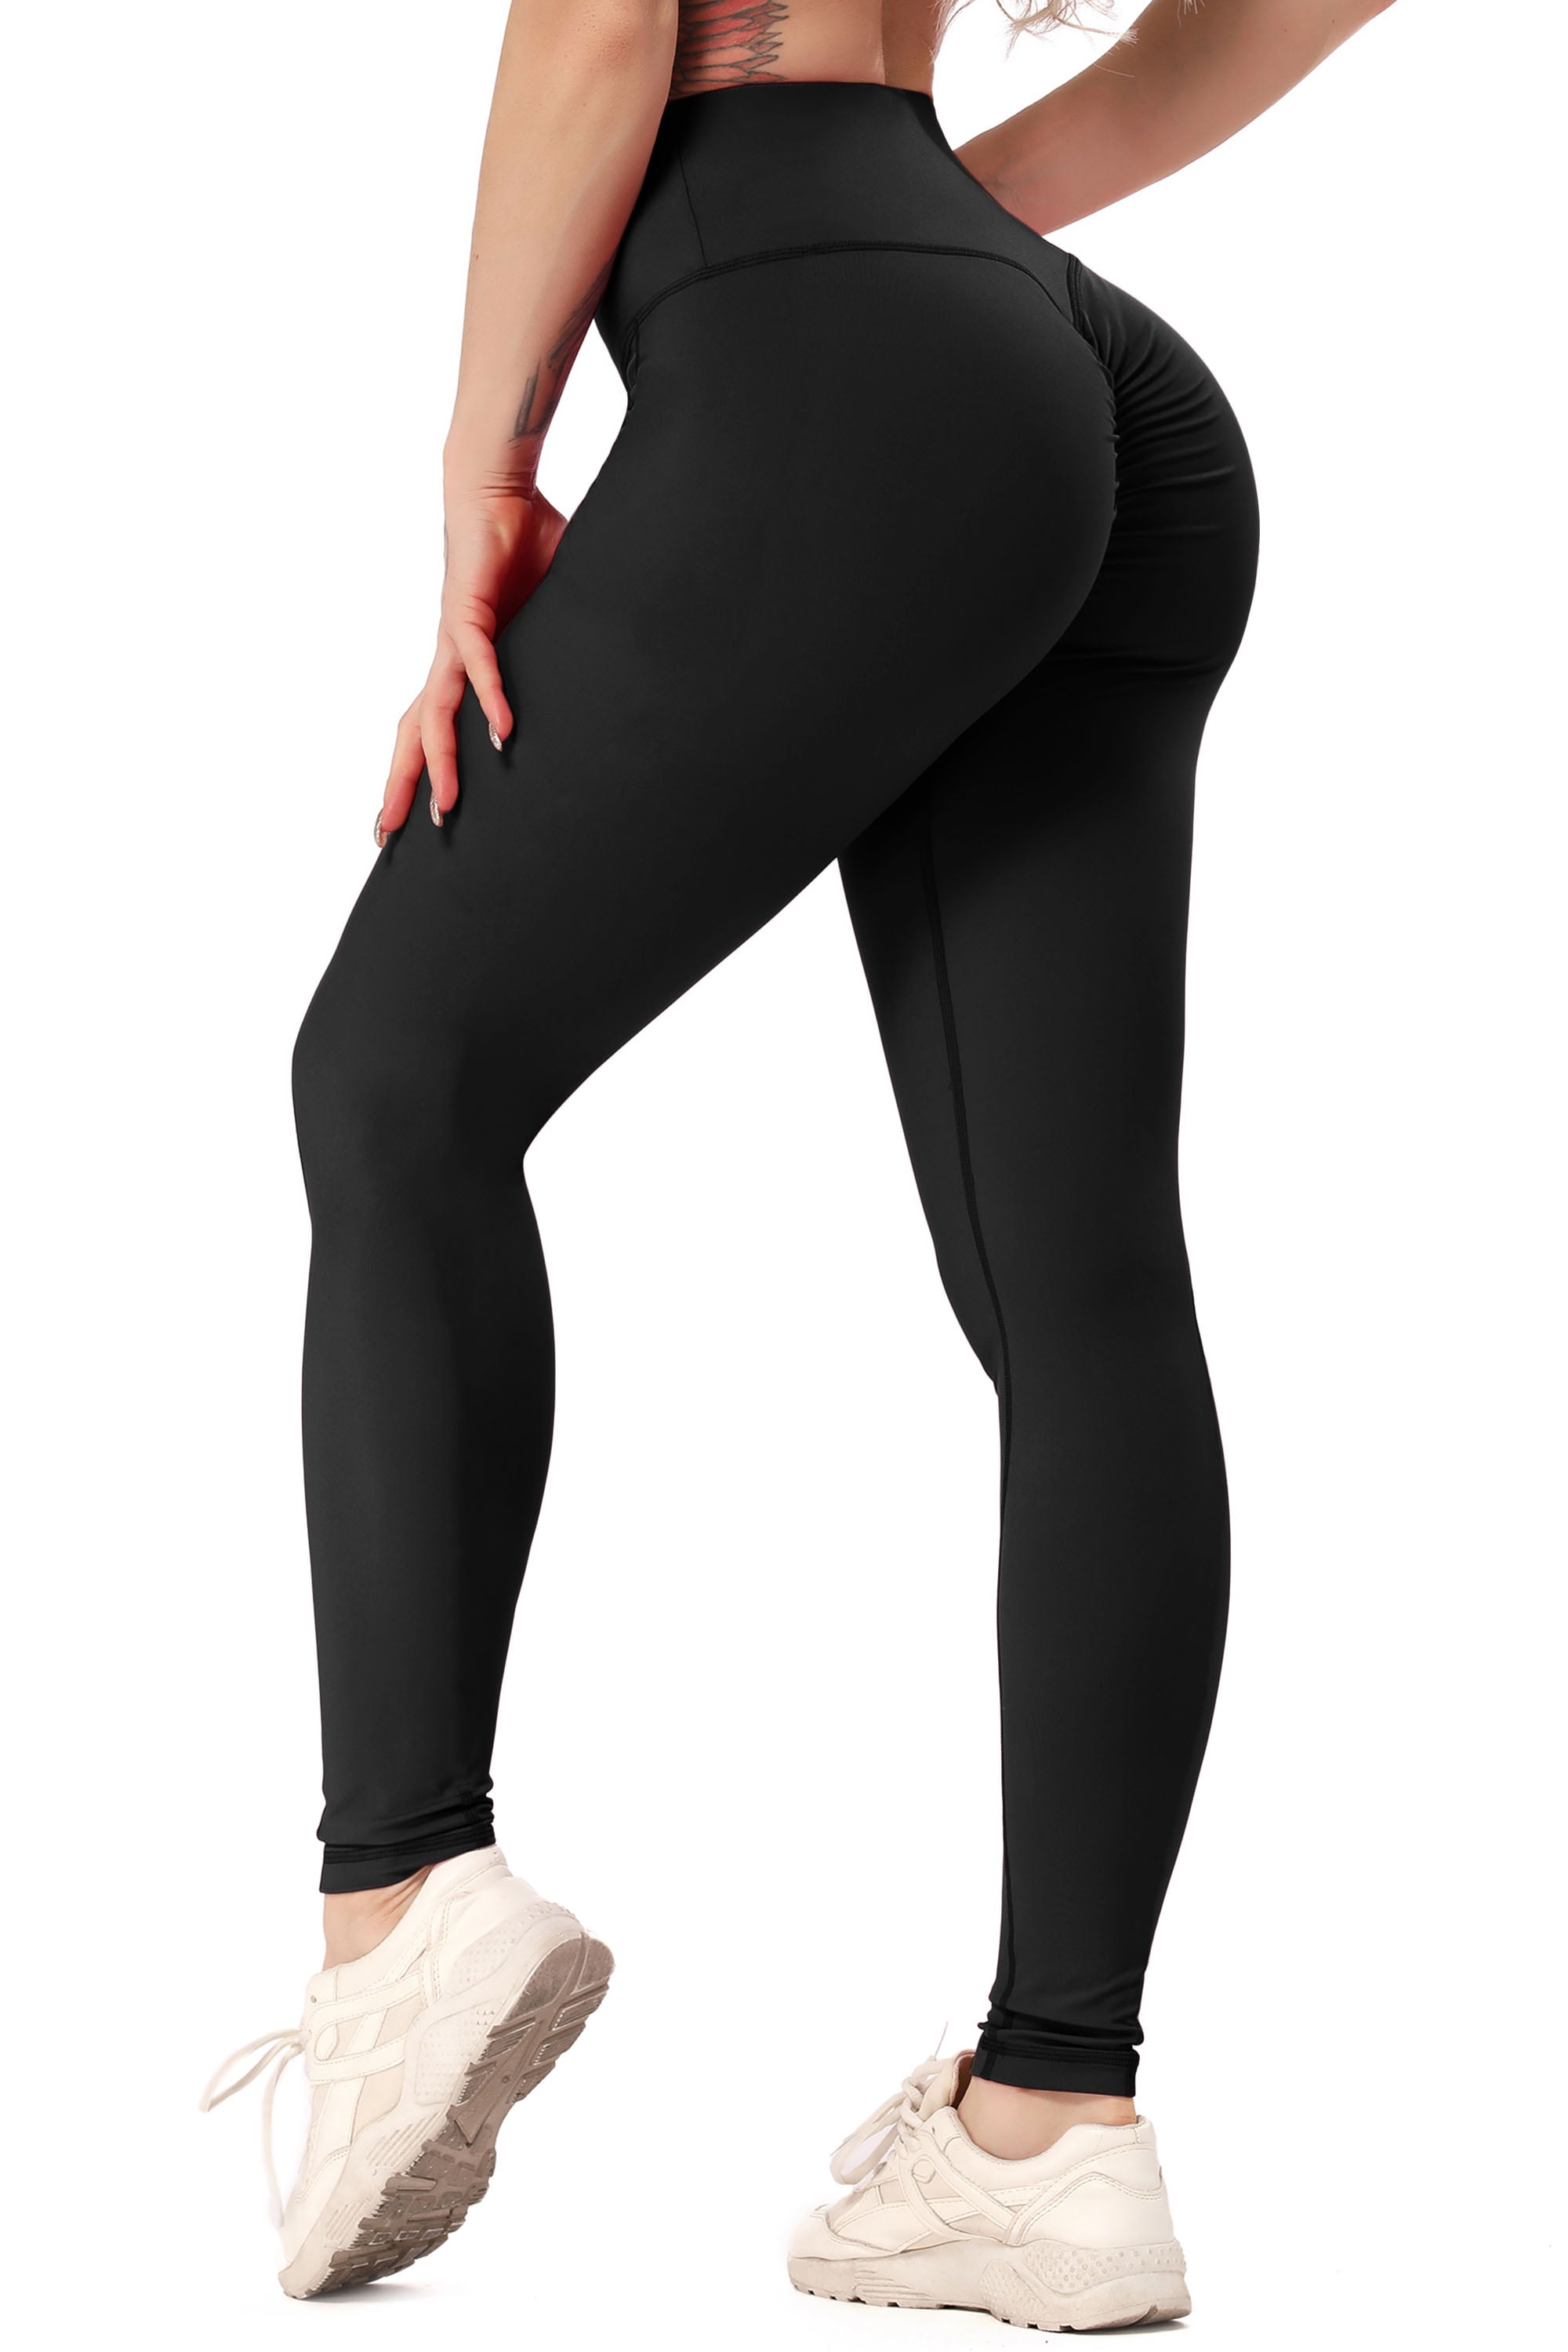 Women Anti Cellulite Yoga Pants High Waist PUSH UP Leggings Ruched Fitness Gym O 